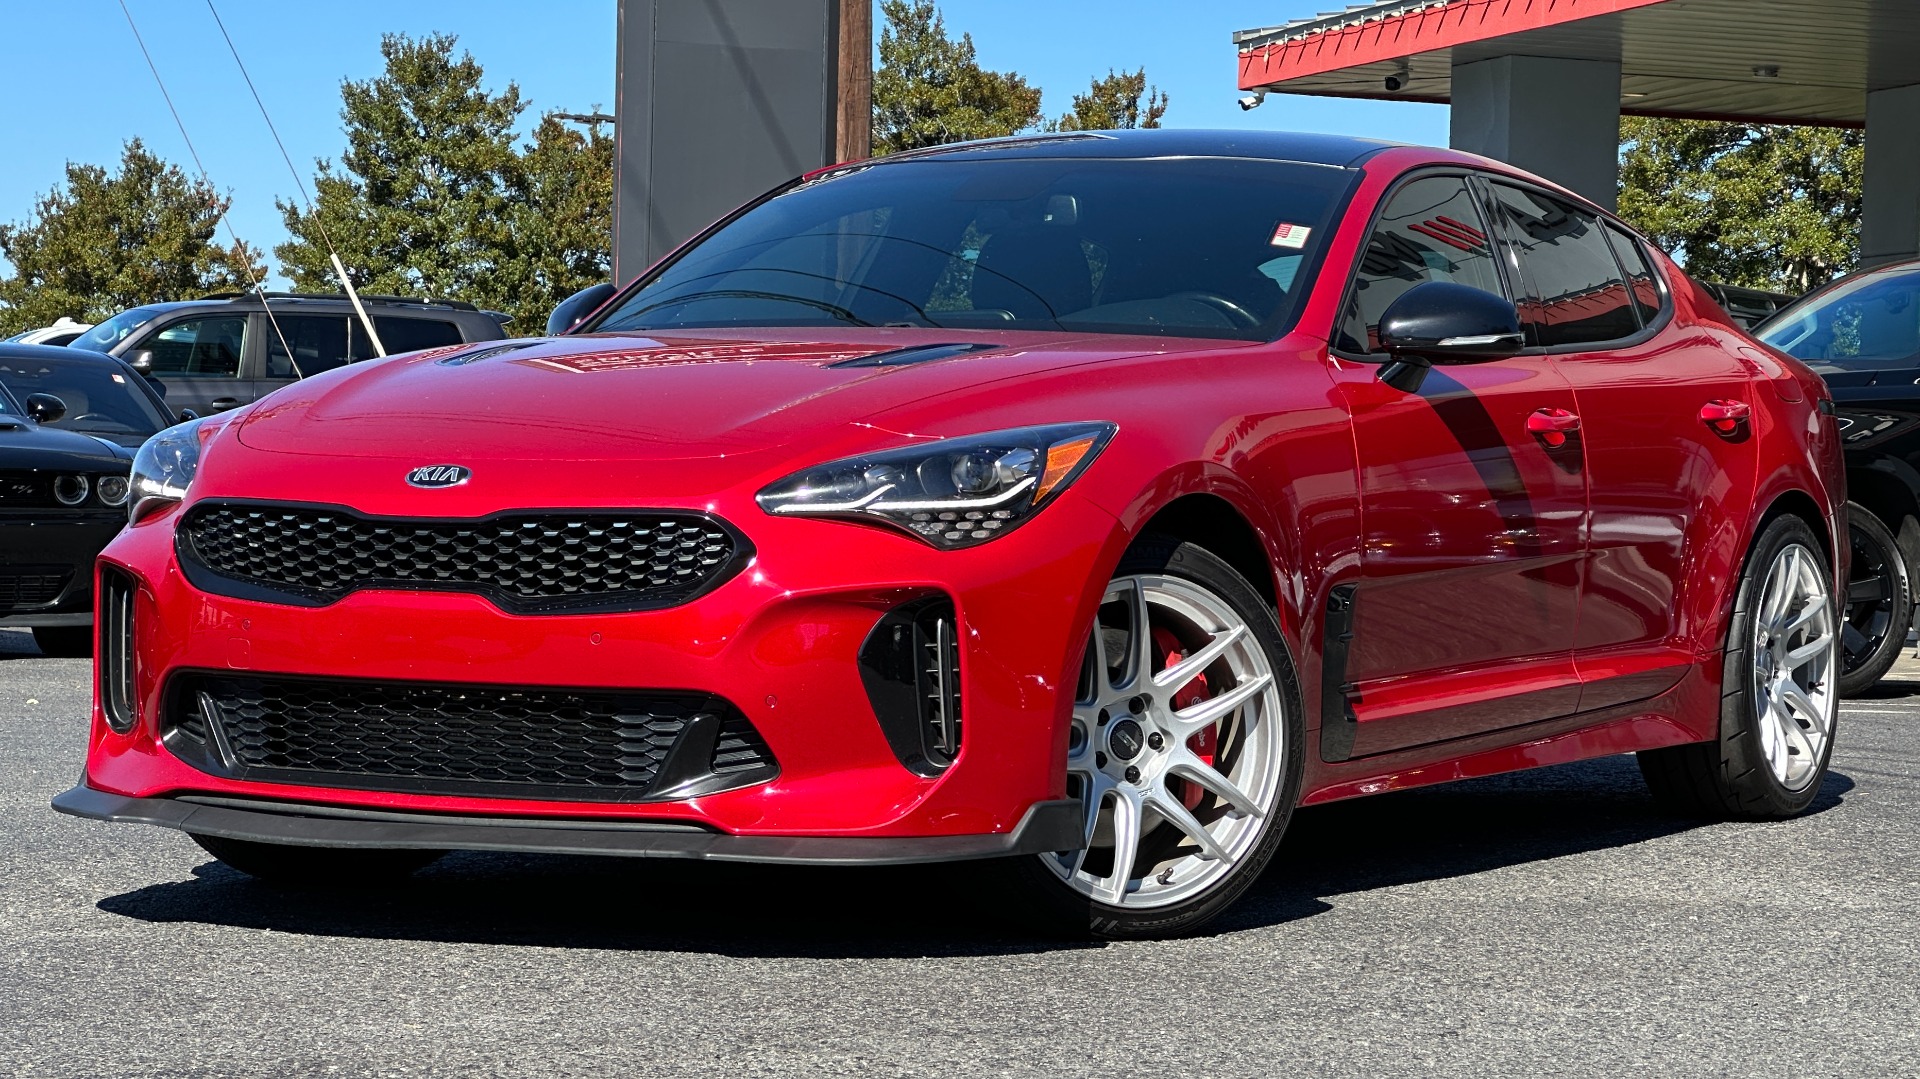 Used 2020 Kia Stinger GT / INTAKE / ESR WHEELS / RED CALIPERS for sale $28,000 at Formula Imports in Charlotte NC 28227 1